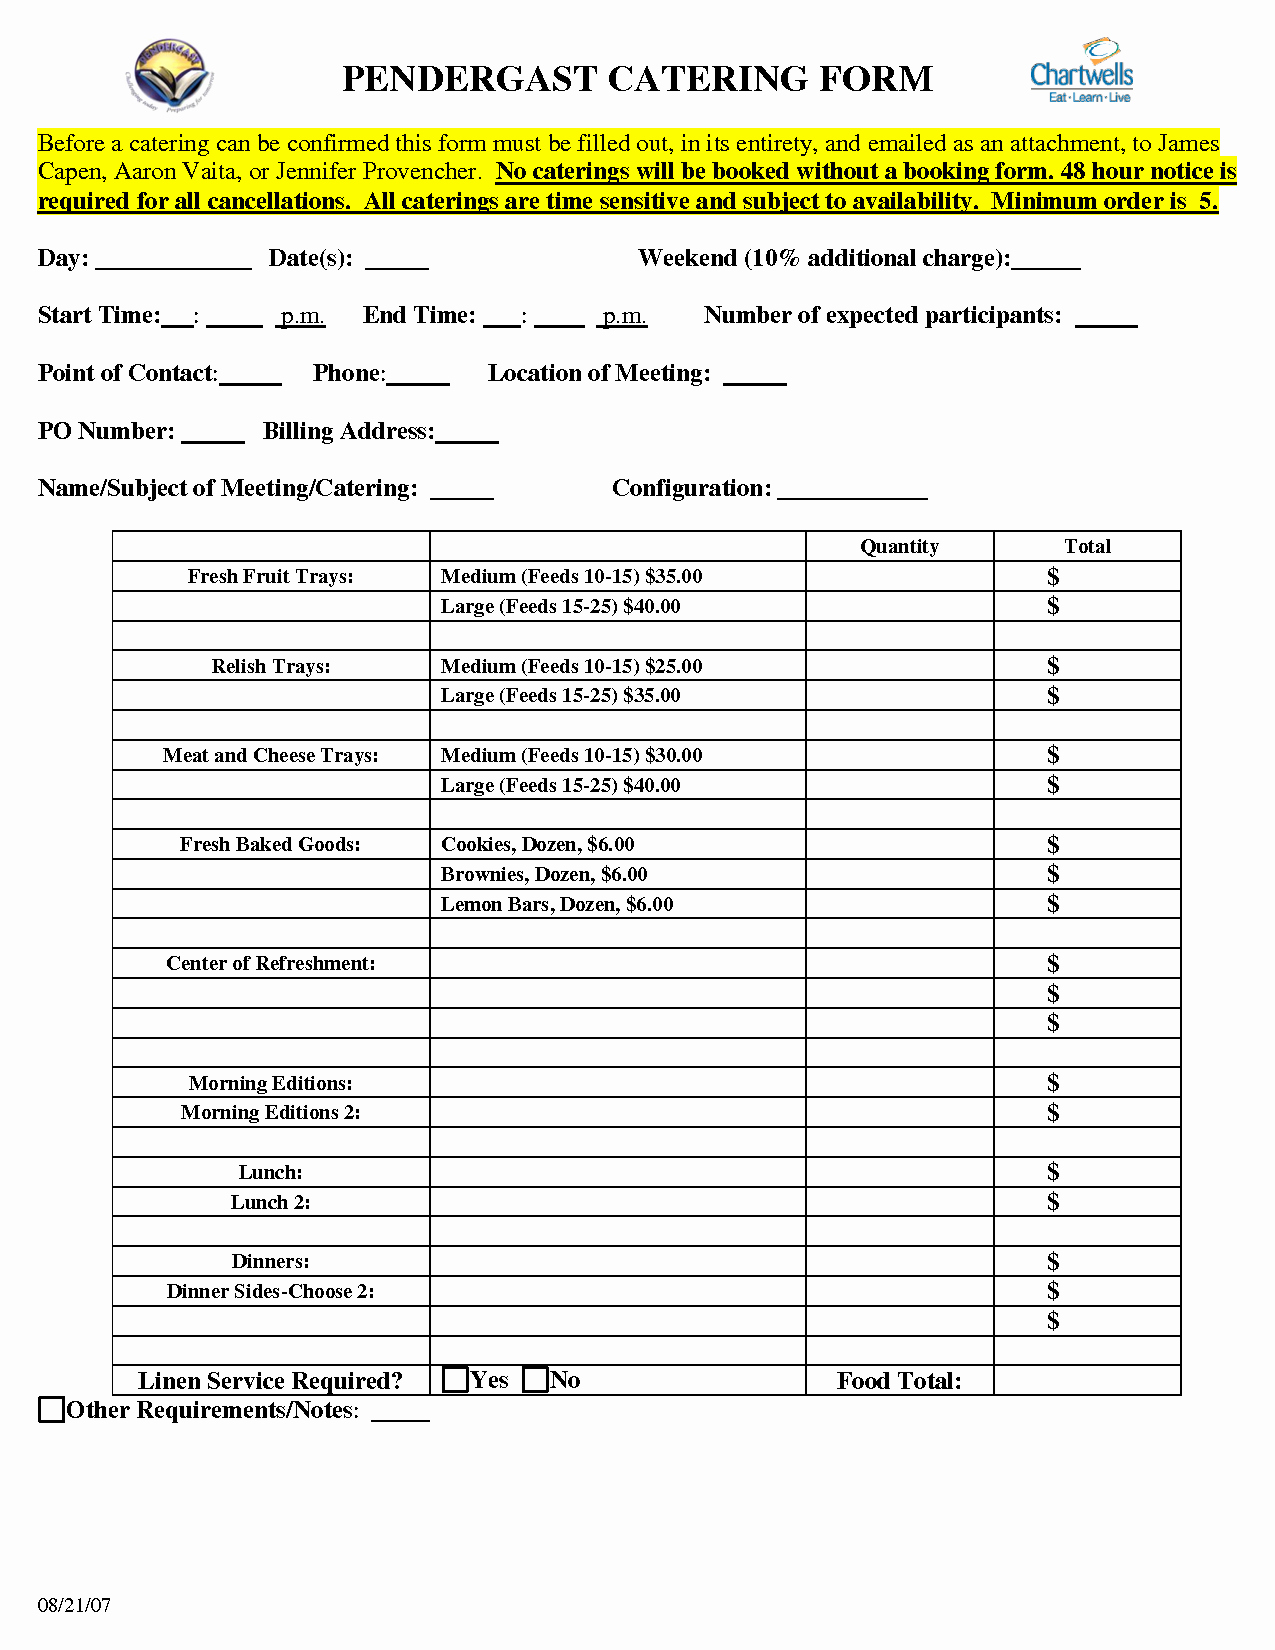 Catering order form Template Fresh Catering order forms Template 11 Catering Invoice